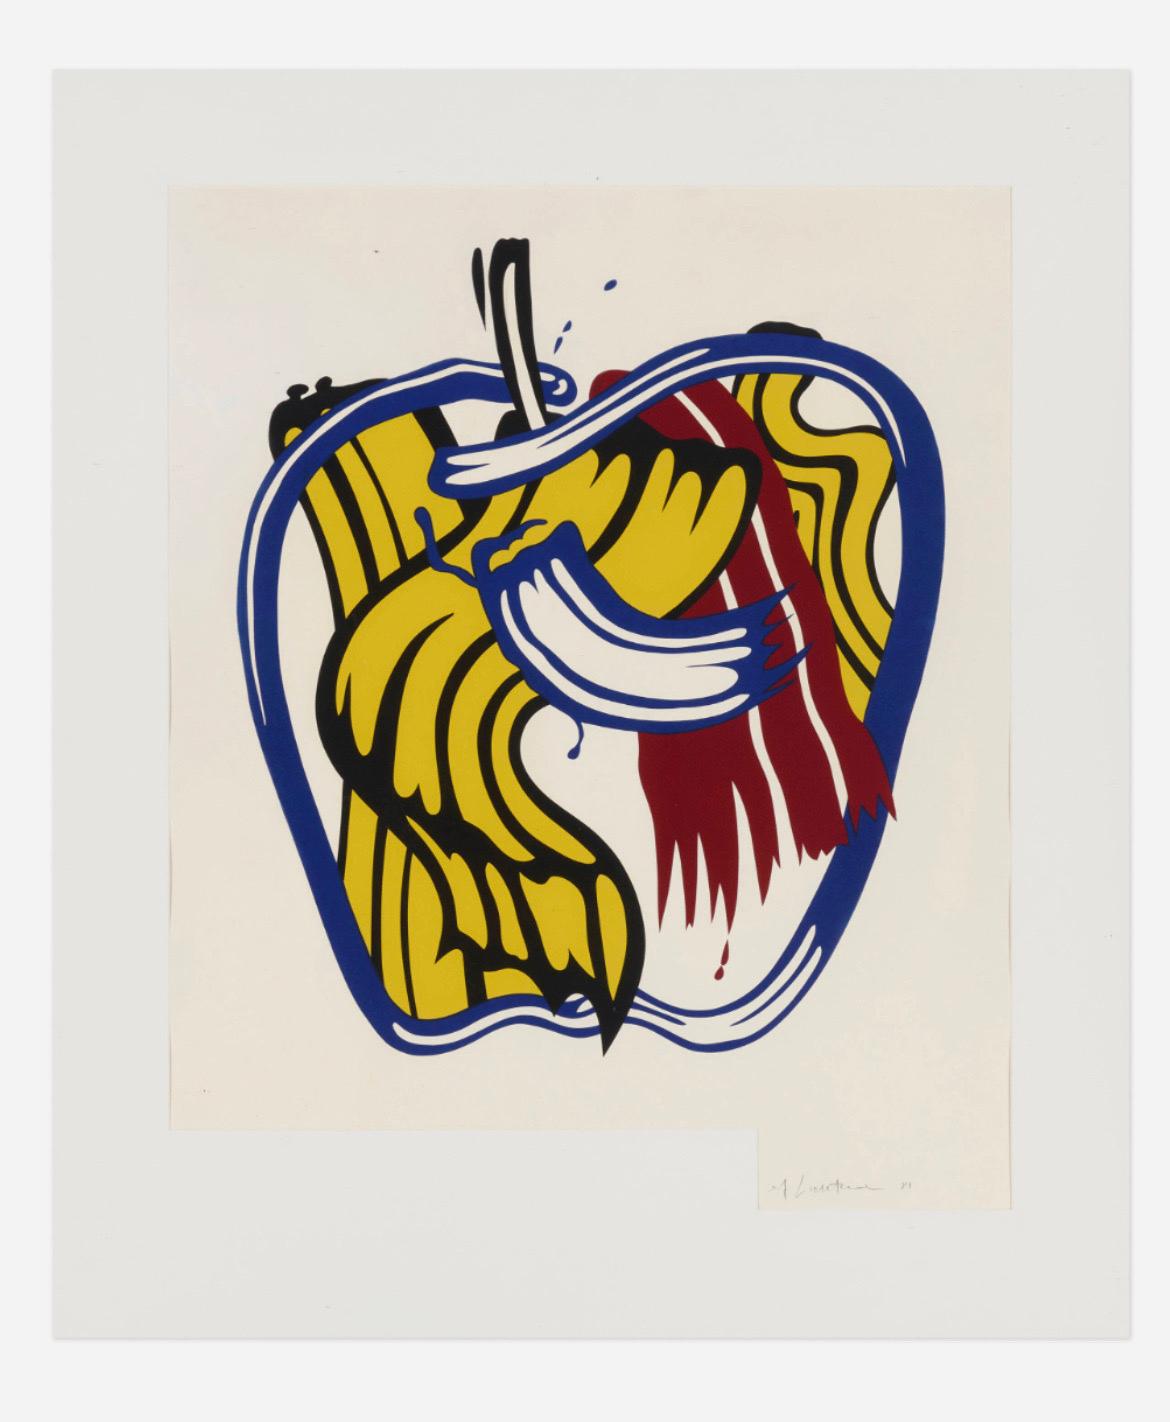 Roy Lichtenstein Lithograph for the St. Louis Art Museum, 1981.
Whitney Museum of American Art
September 22 - Novemver 29, 1981
Organized by The Saint Louis Art Museum
made possible with the generous support of The American Express Foundation.
The